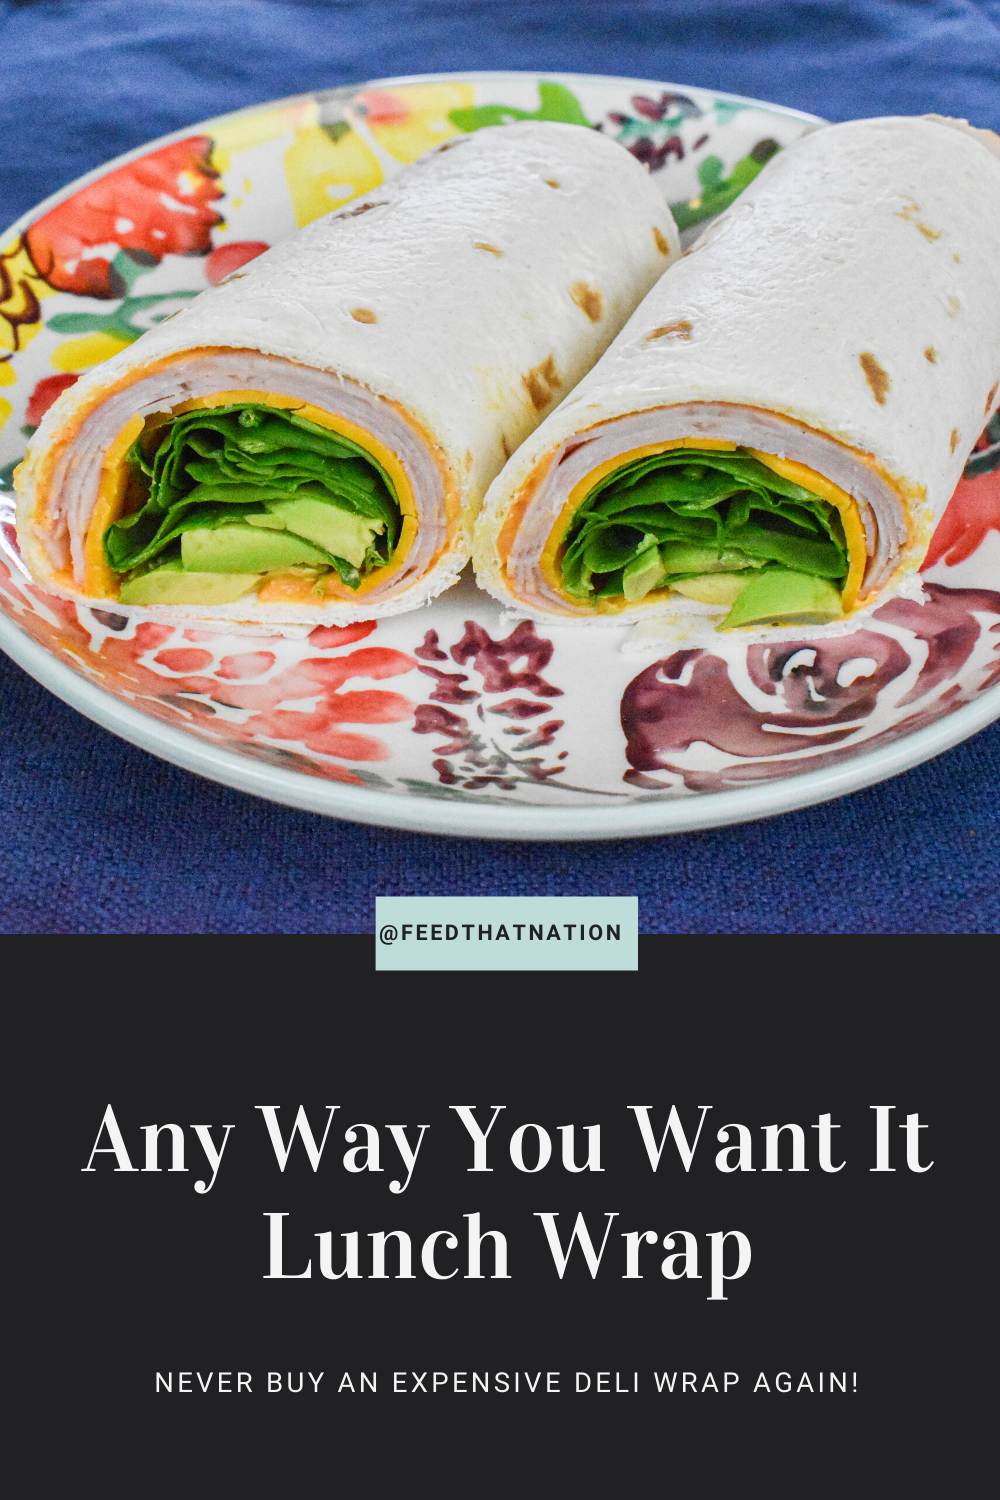 Any Way You Want It Lunch Wrap